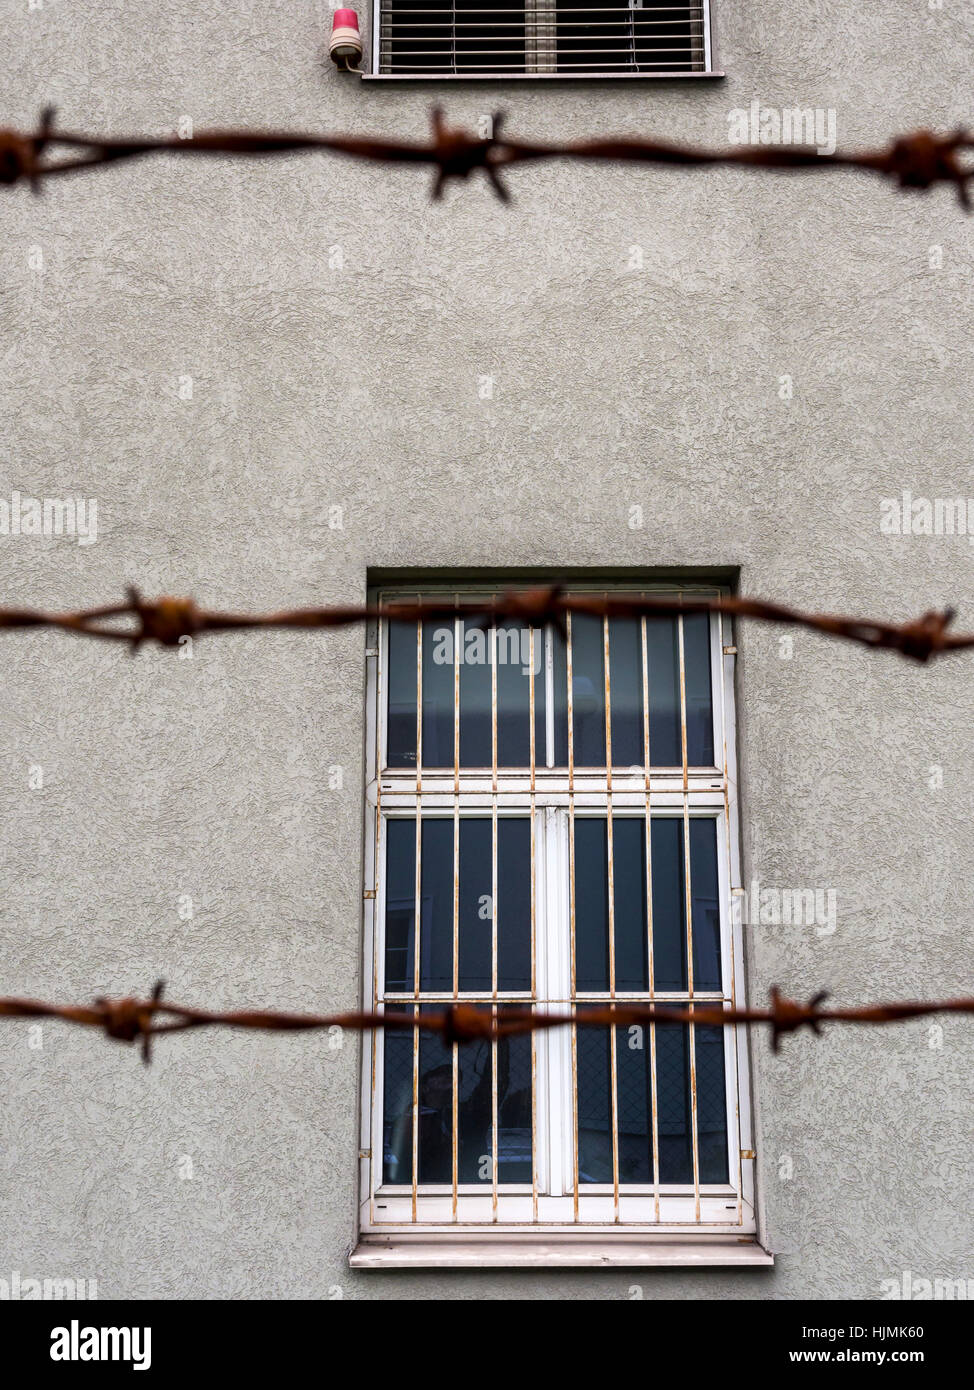 Barred window behind barbed wire Stock Photo